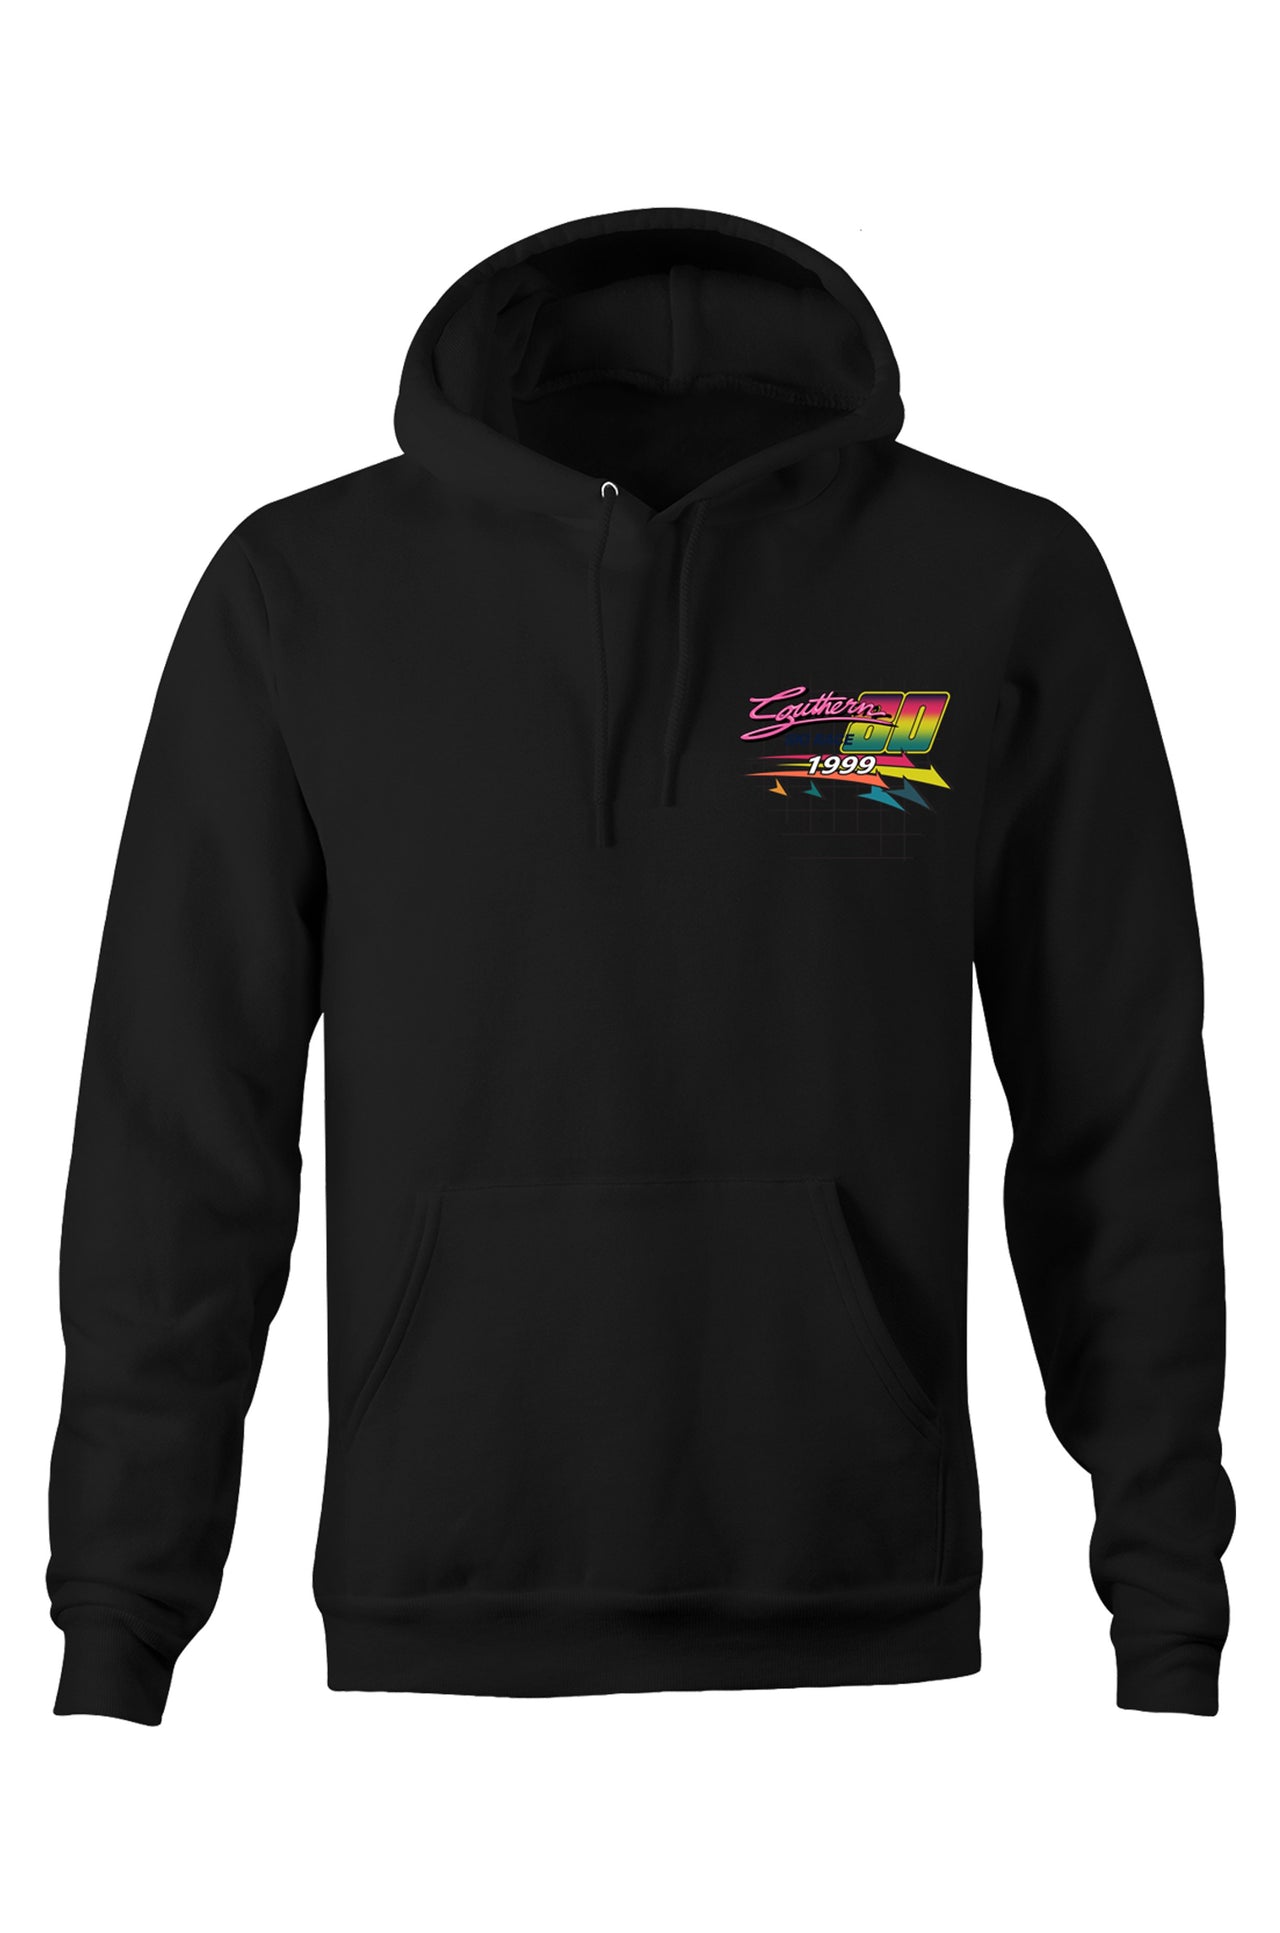 S80 1999 Gods Gift Event Adult Hoodie